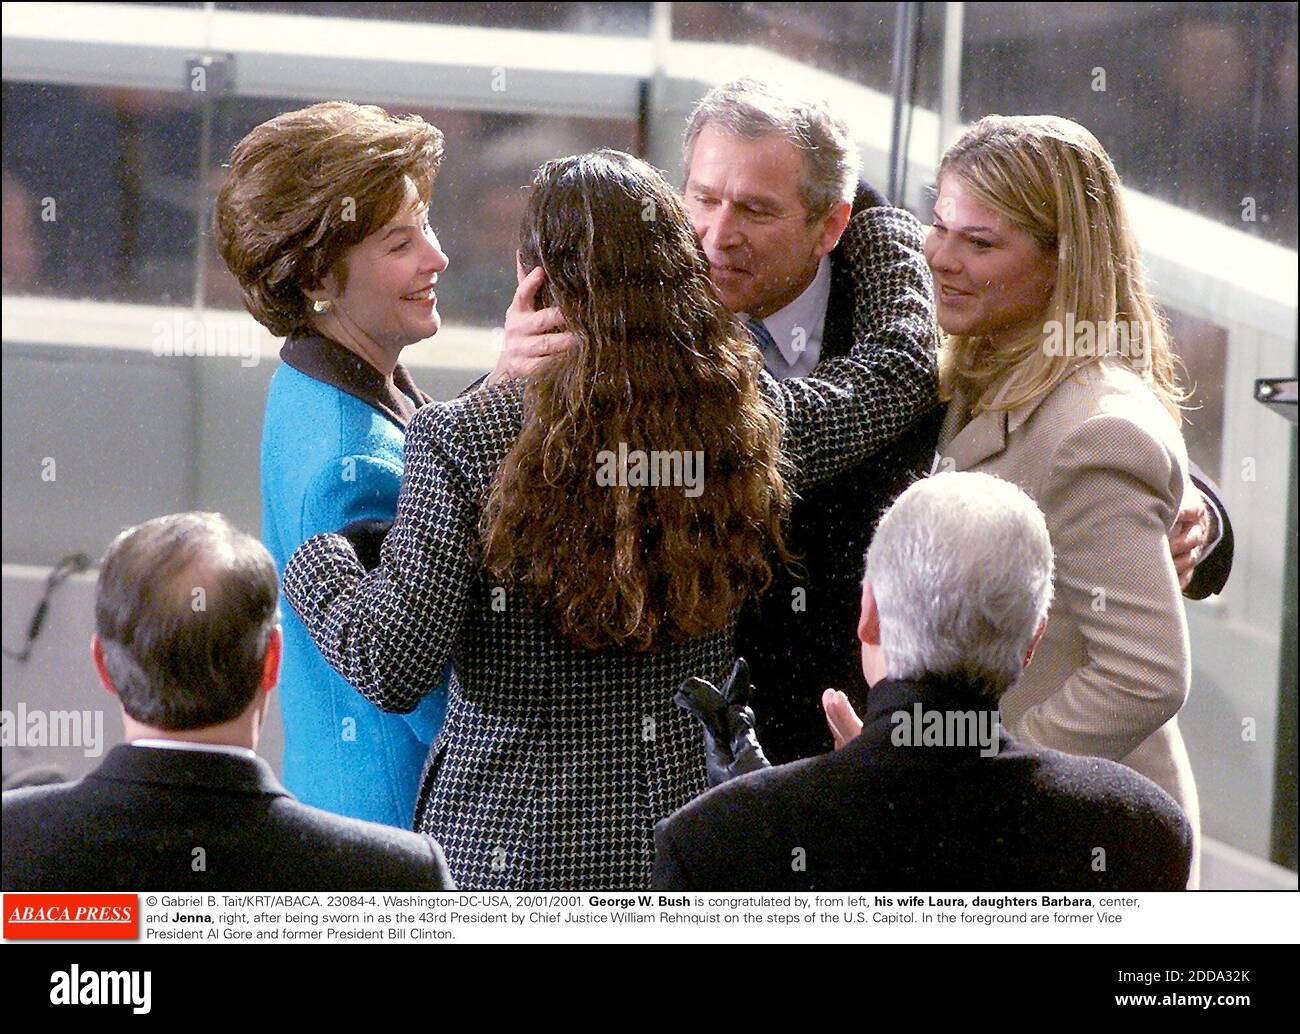 NO FILM, NO VIDEO, NO TV, NO DOCUMENTARY - © Gabriel B. Tait/KRT/ABACA. 23084-4. Washington-DC-USA, 20/01/2001. George W. Bush is congratulated by, from left, his wife Laura, daughters Barbara, center, and Jenna, right, after being sworn in as the 43rd President by Chief Justice William Rehnquist Stock Photo